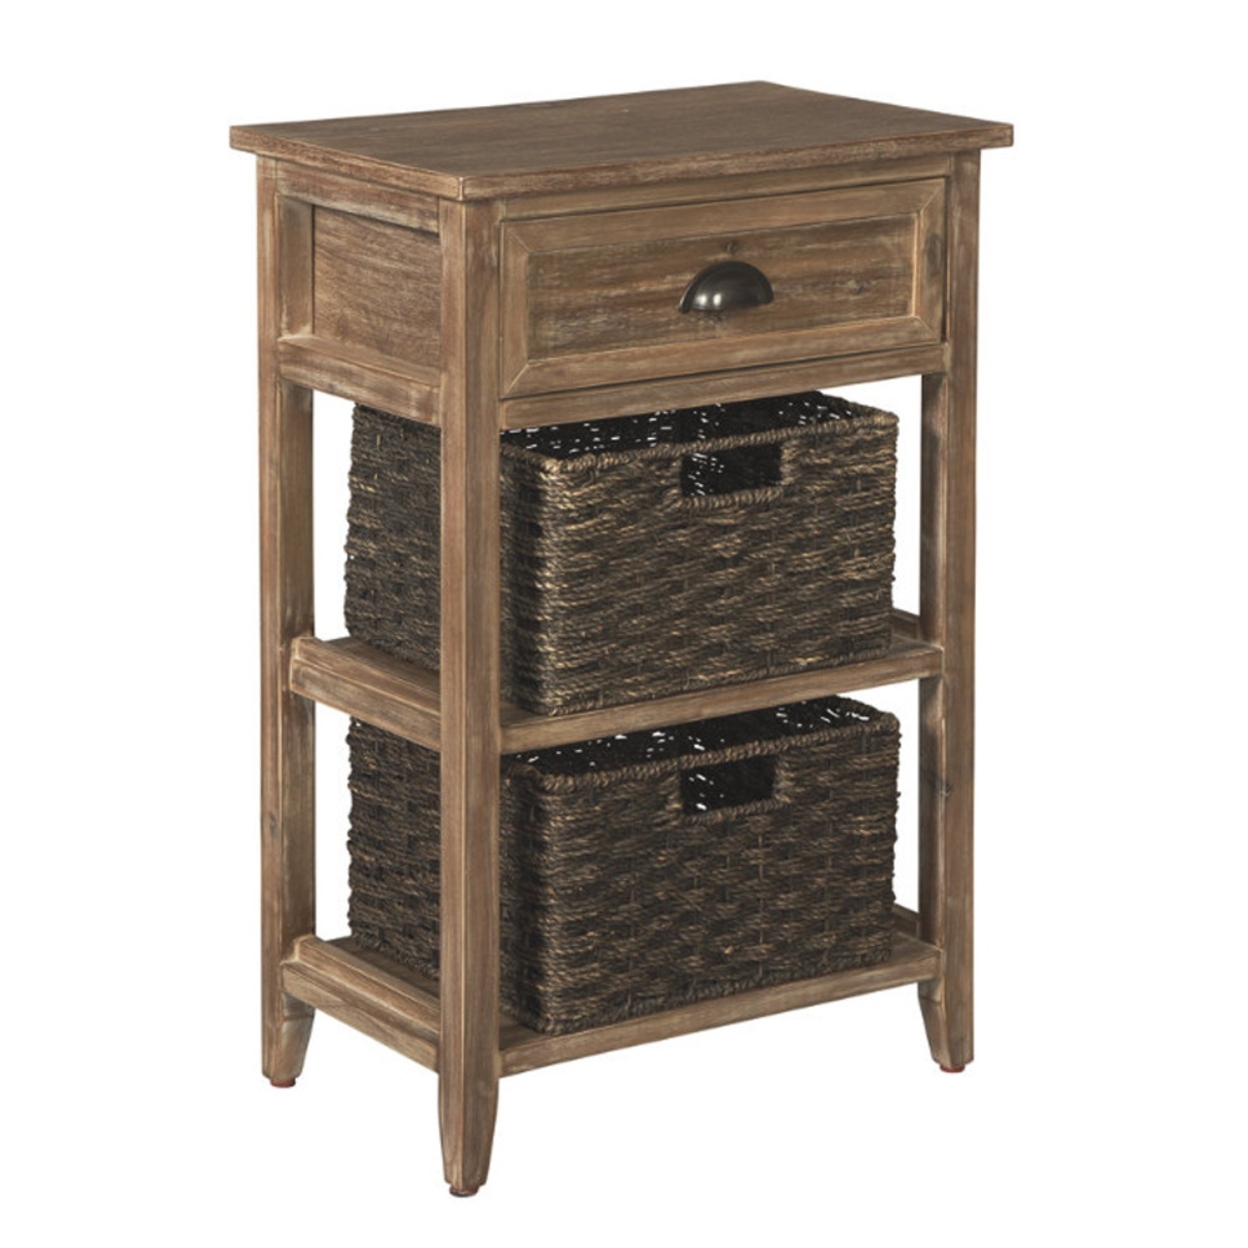 Cottage Style Wooden Accent Table With Two Woven Storage Baskets, Brown- Saltoro Sherpi